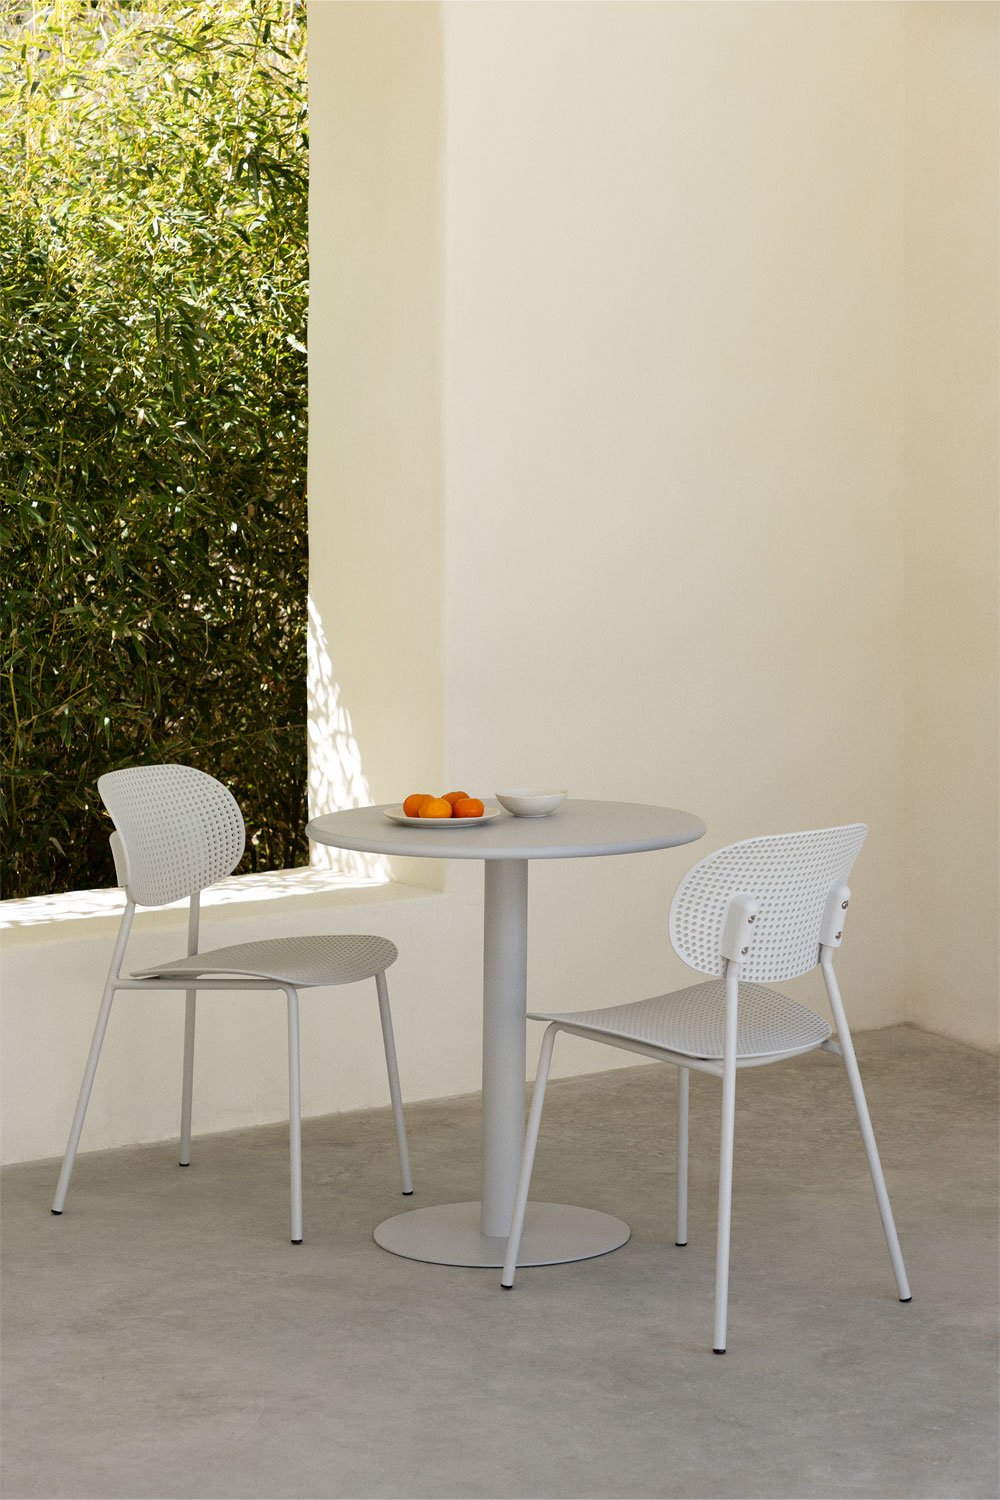 Mizzi Round Table Set (Ø70 cm) and 2 Tupah Garden Chairs, gallery image 1